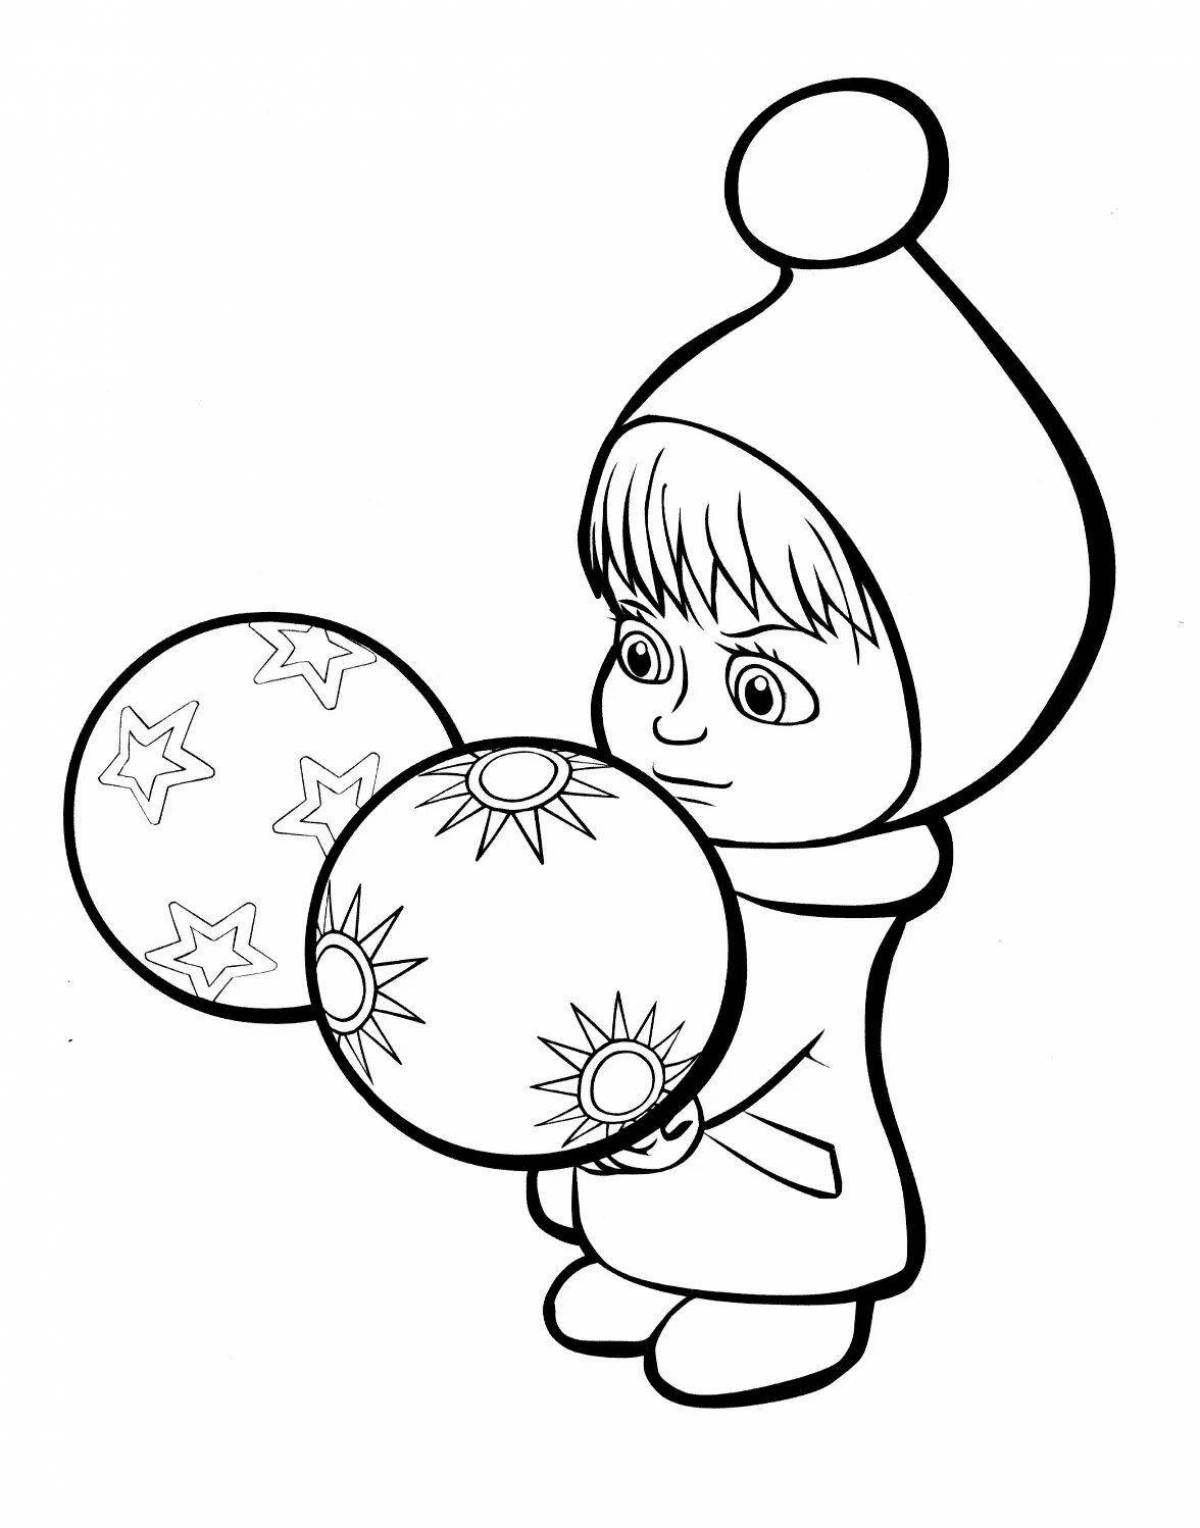 Colour explosion coloring pages for 3 year old girls, new